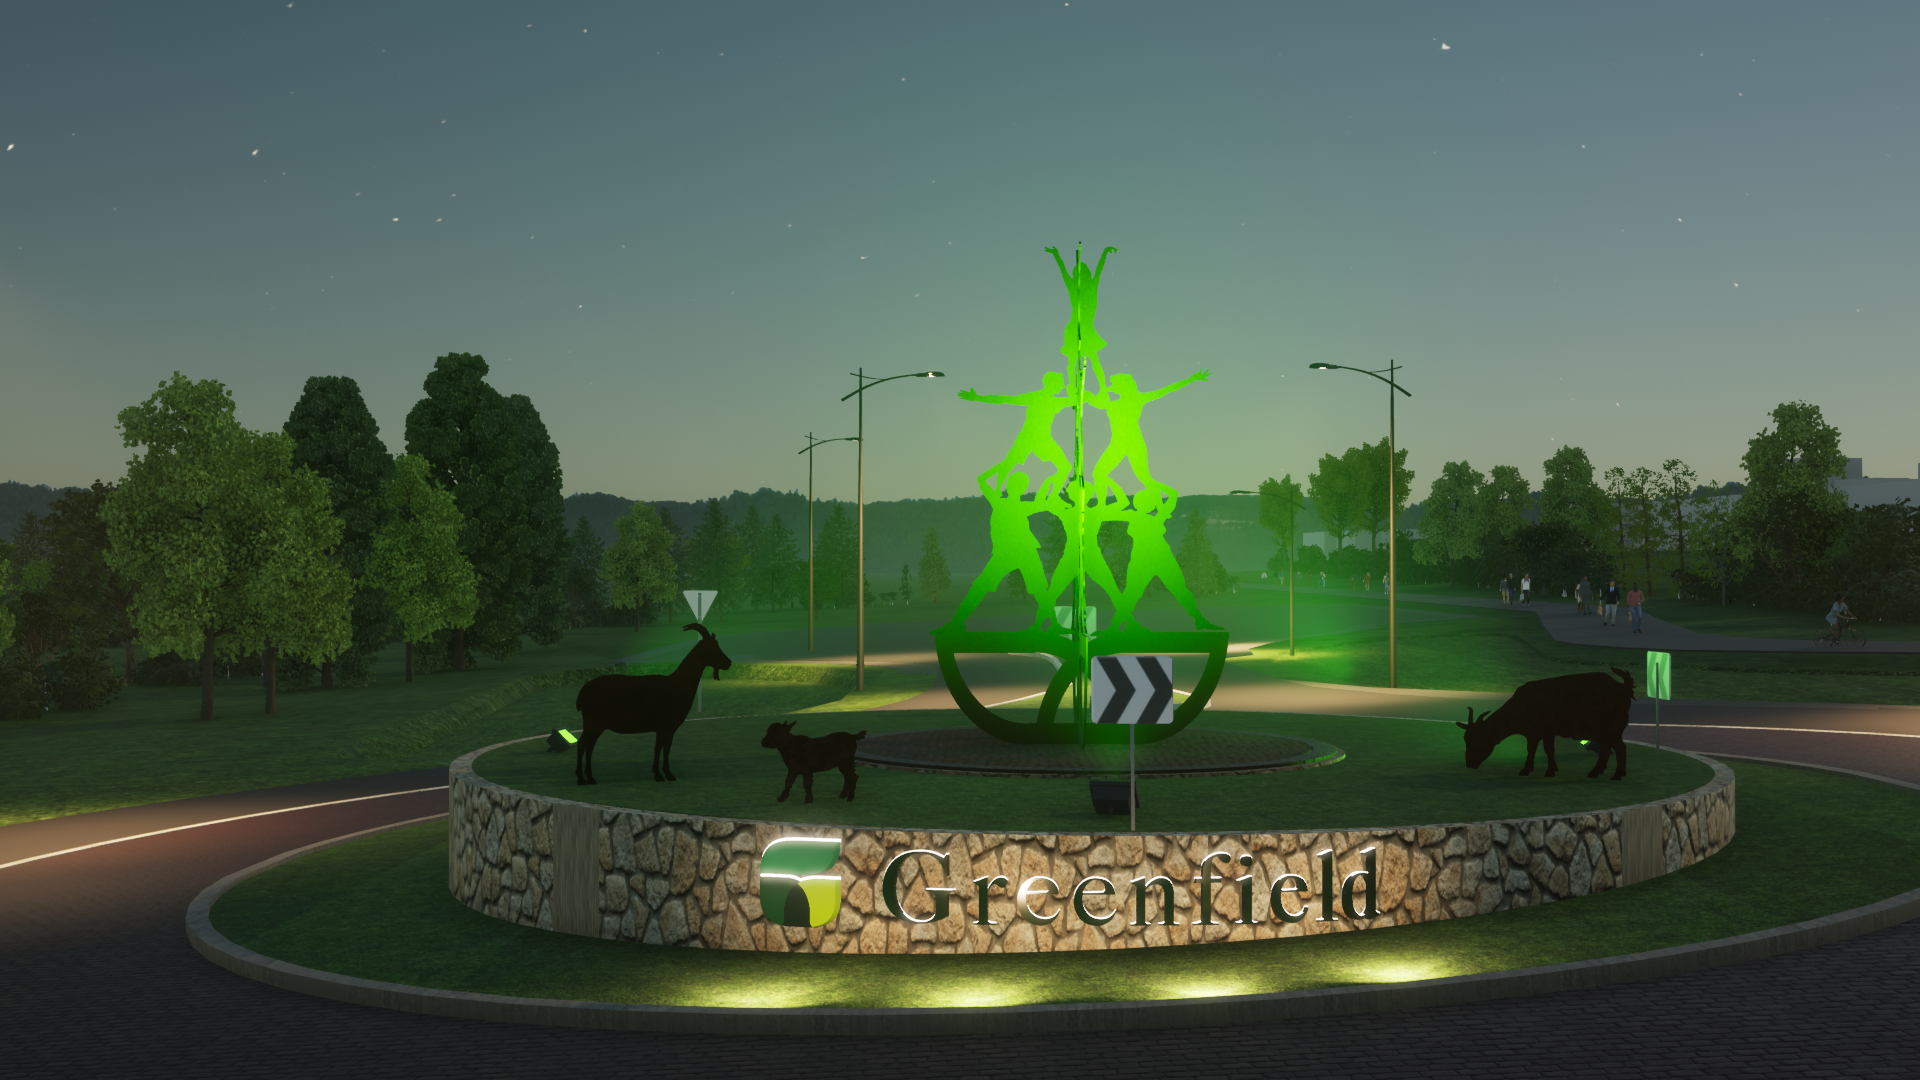 Roundabout art sculpture at night with green up lighting. 